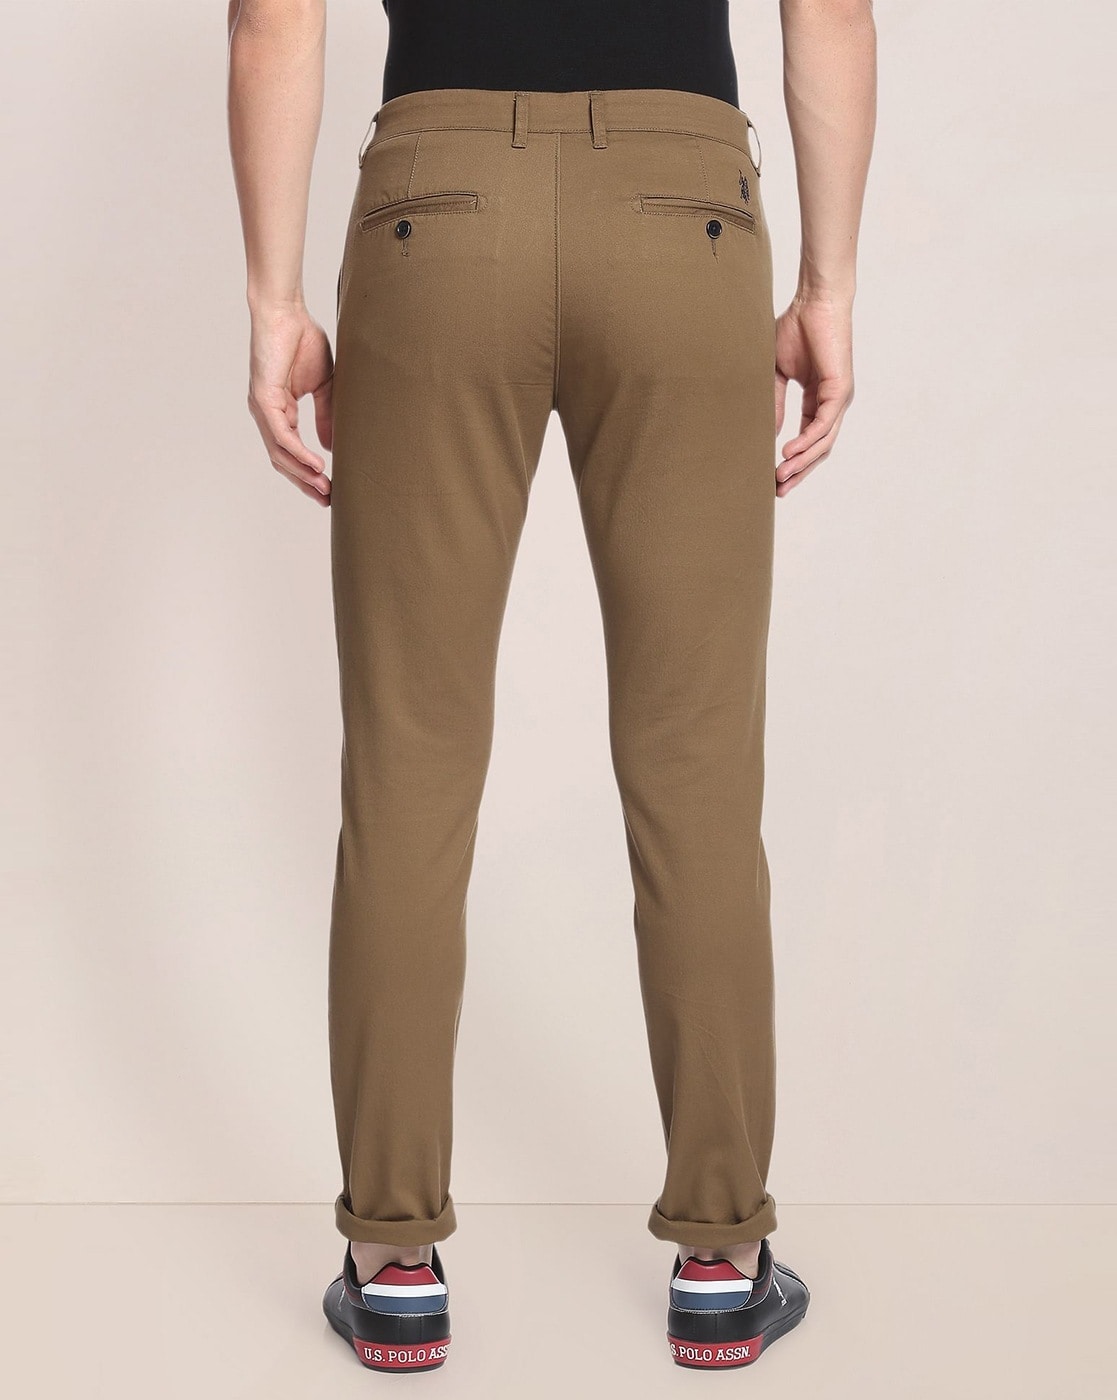 U S Polo Assn 35 Gray Mens Trousers  Get Best Price from Manufacturers   Suppliers in India